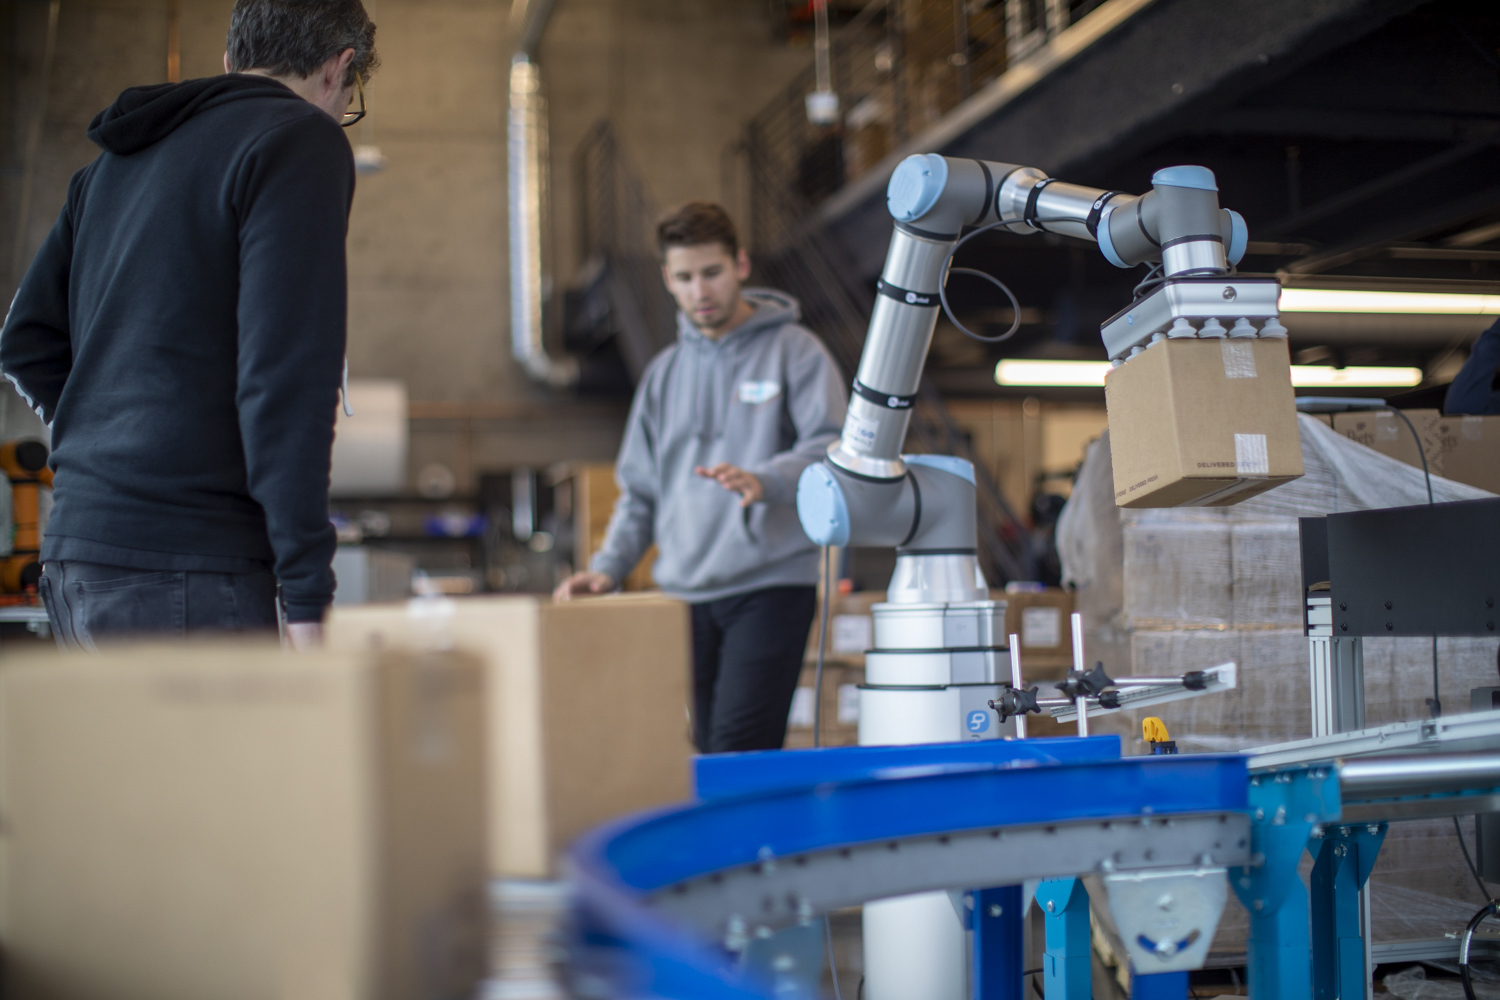 Rapid Robotics and Universal Team up to Fight Labor Shortages With Swift Cobot Deployments | Business Wire